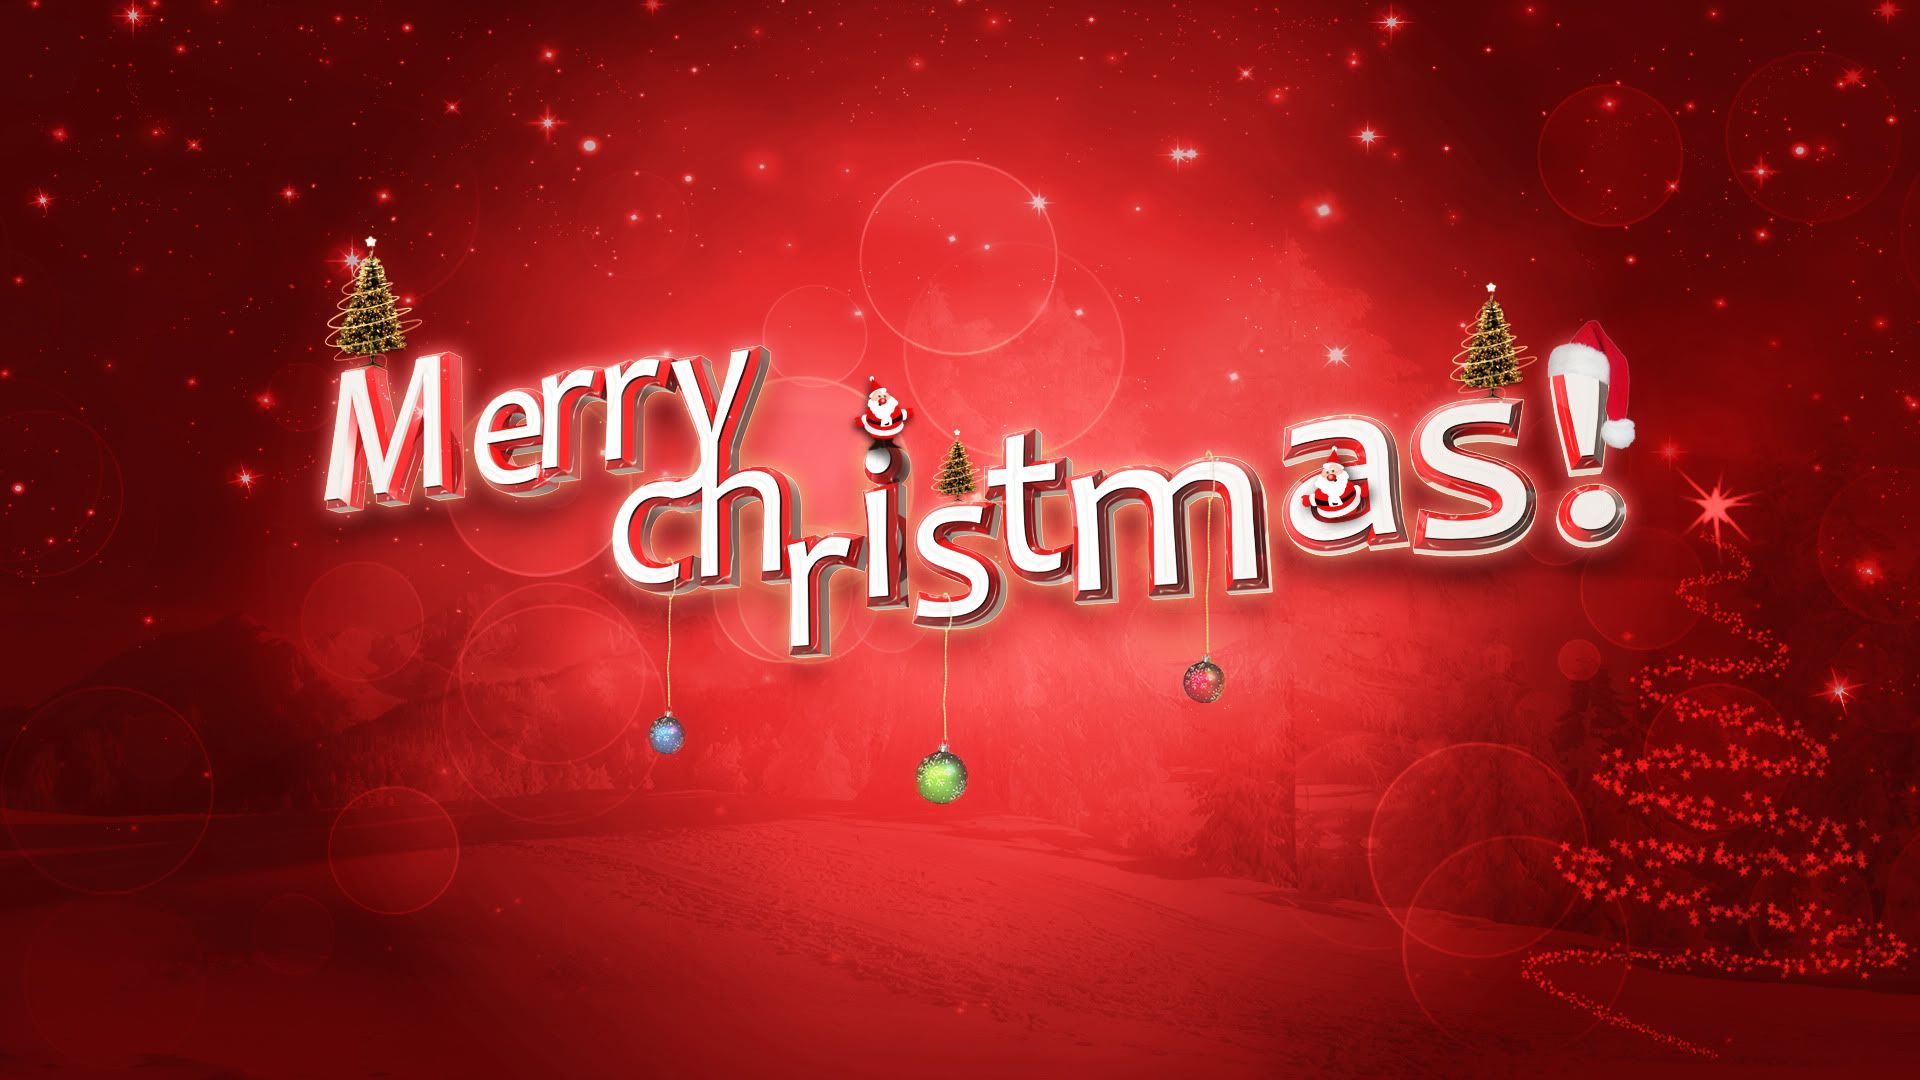 Advance Merry Christmas 2016 Image Picture Whatsapp dp Wallpaper Gallery